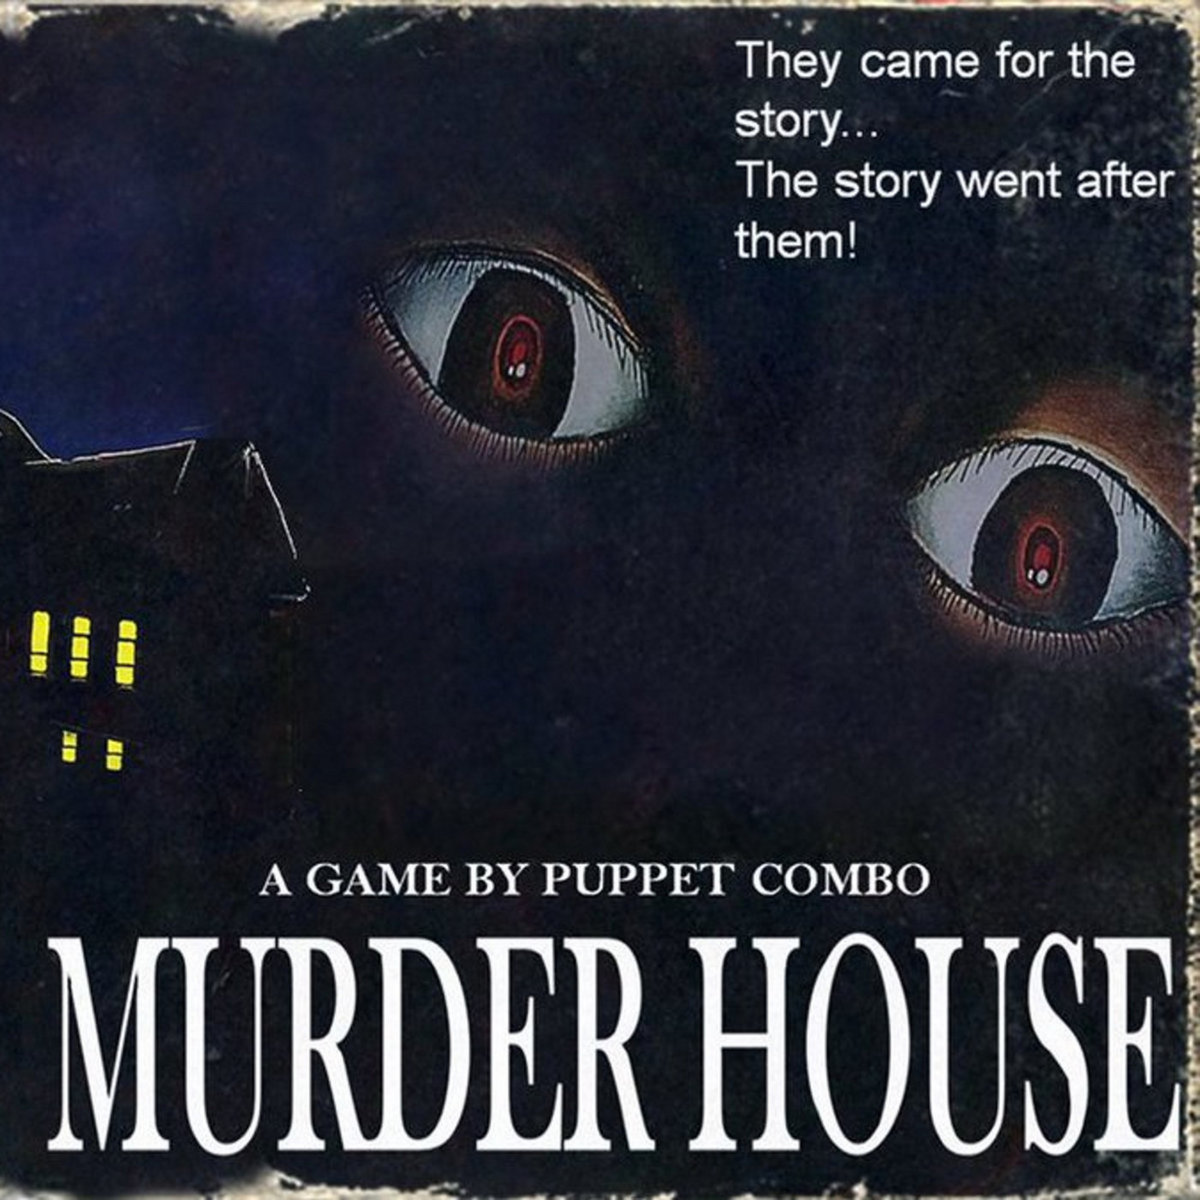 Murder House eBook by Puppet Combo - EPUB Book